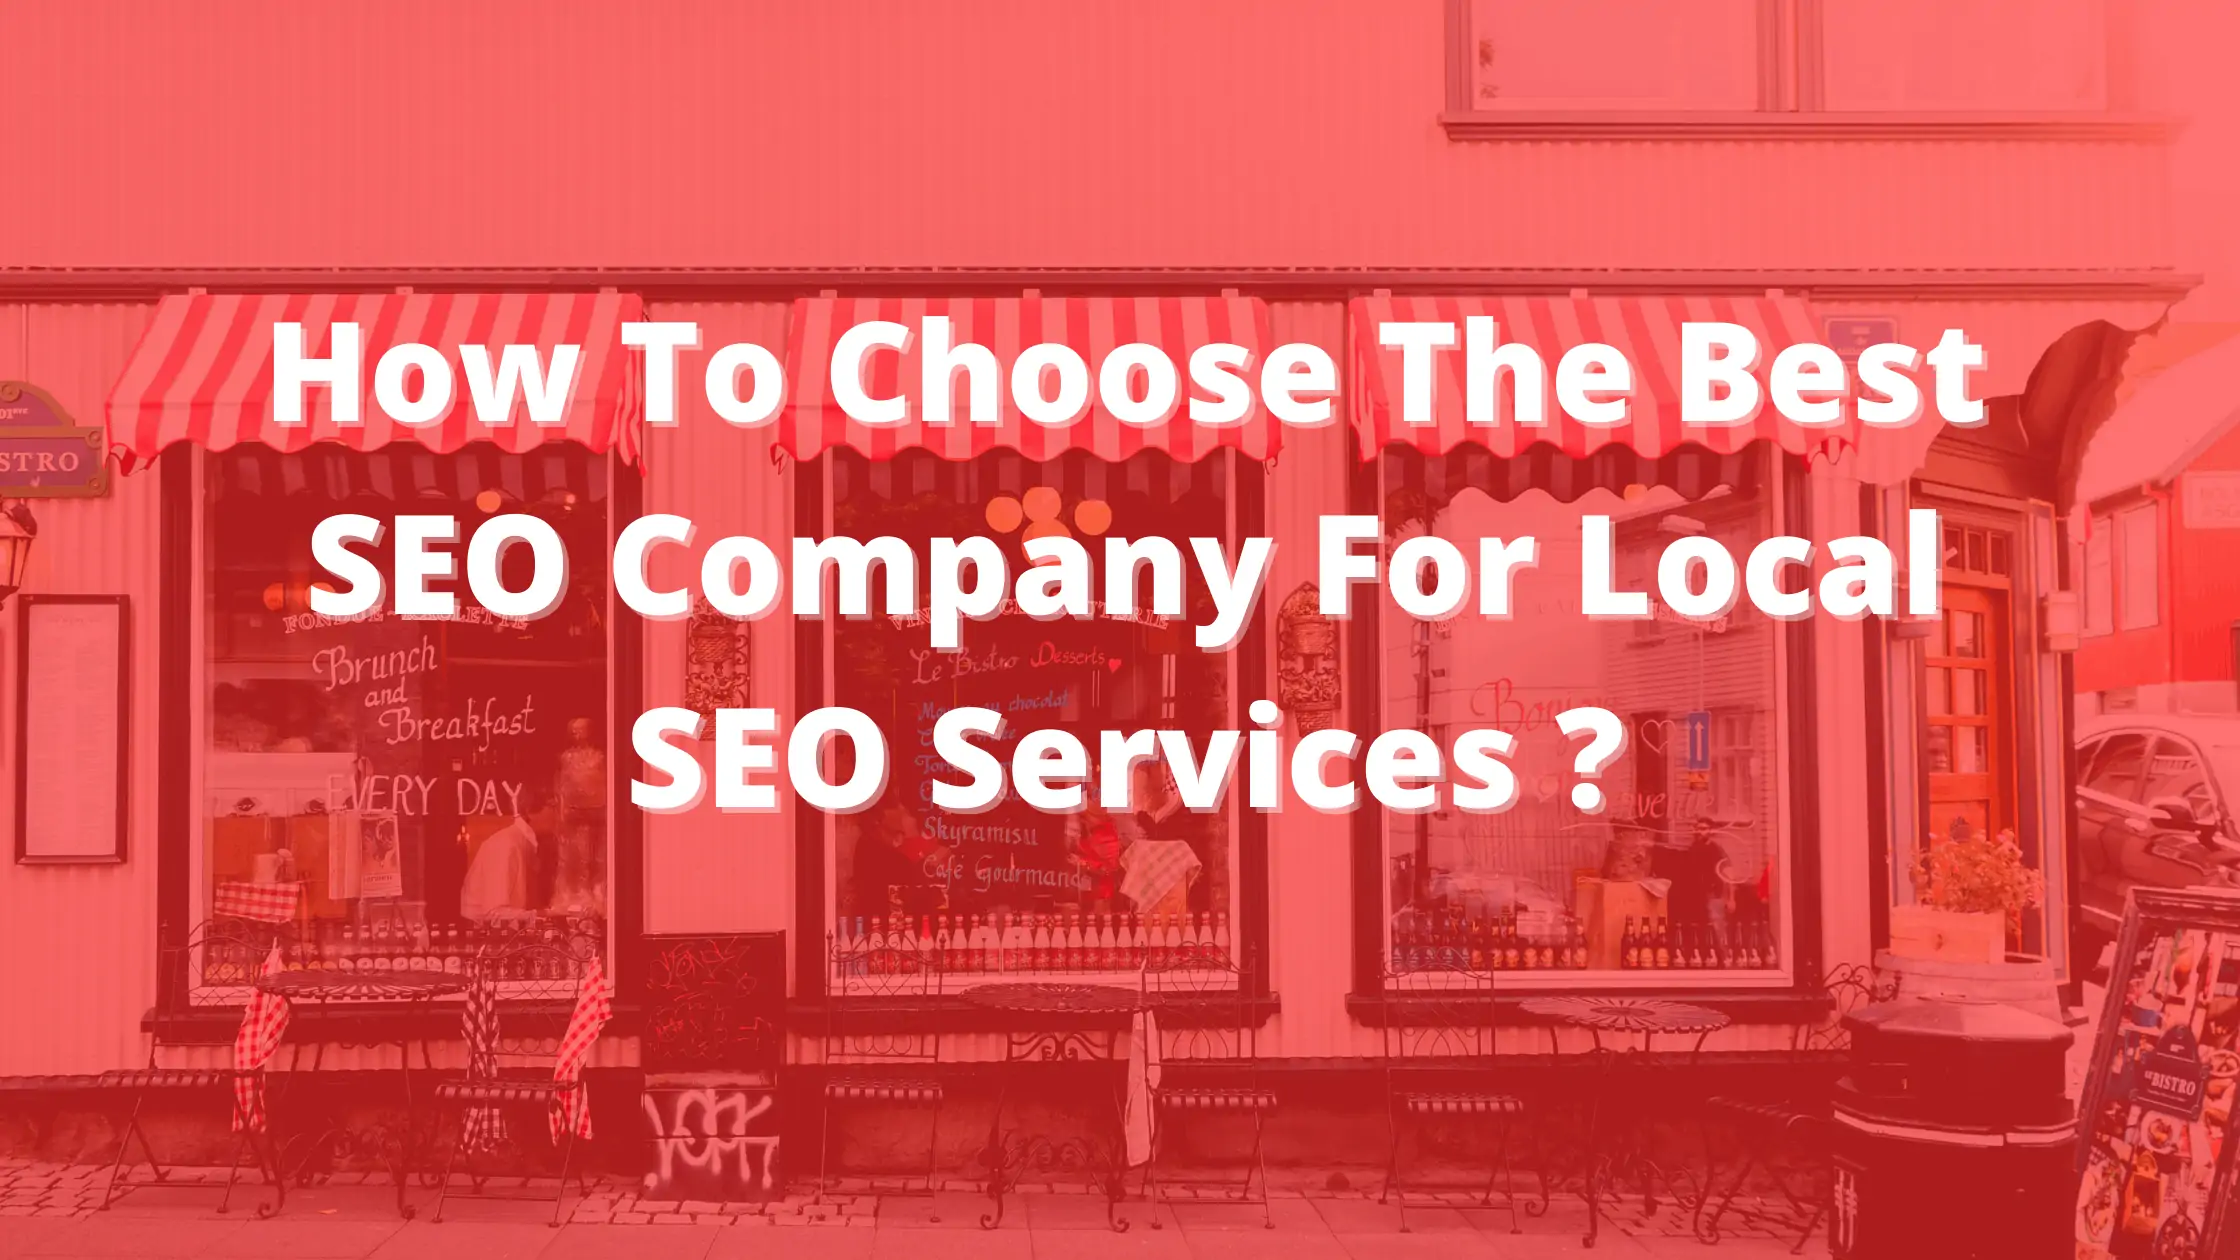 How To Choose The Best SEO Company For Local SEO Services ?